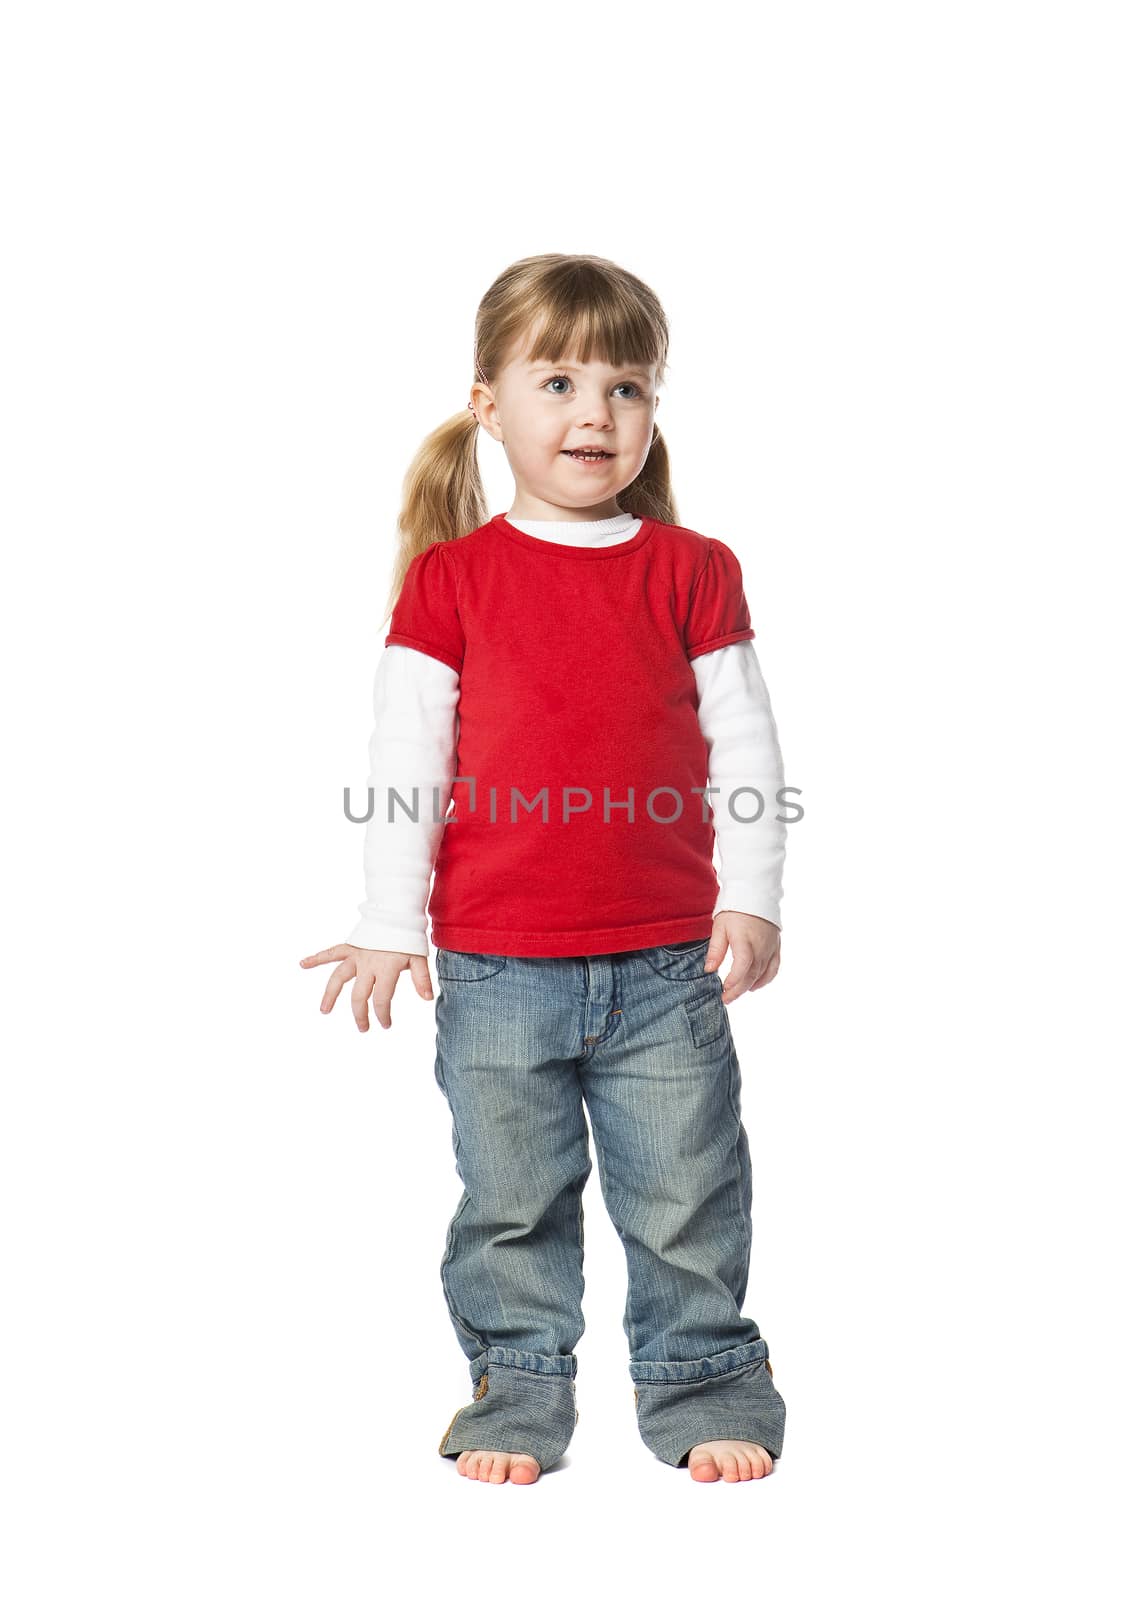 Two years old Girl isolated on white background